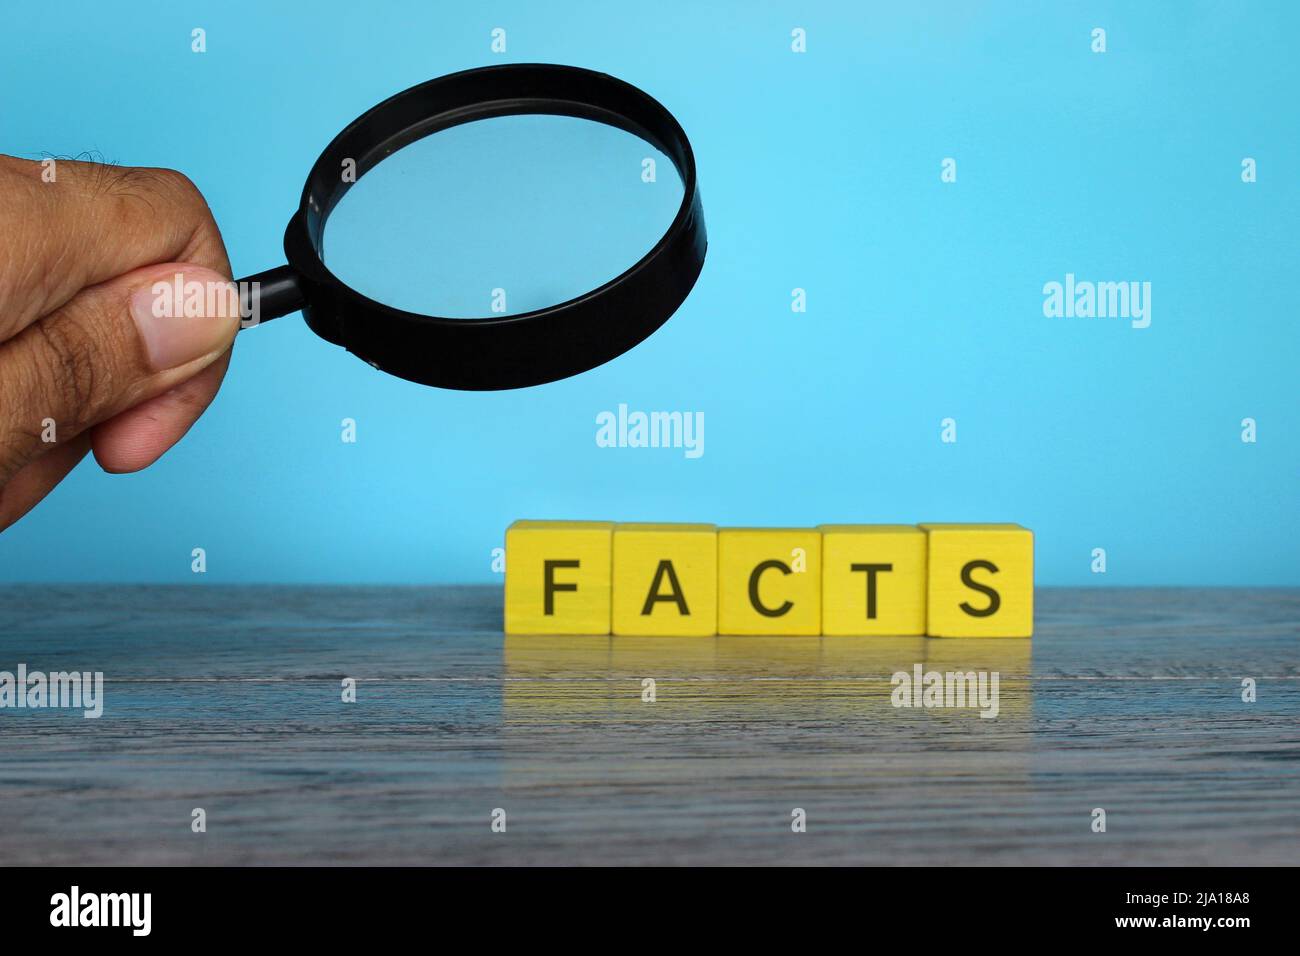 Hand holding magnifying glass and wooden cubes with text FACTS. Checking facts and data concept Stock Photo